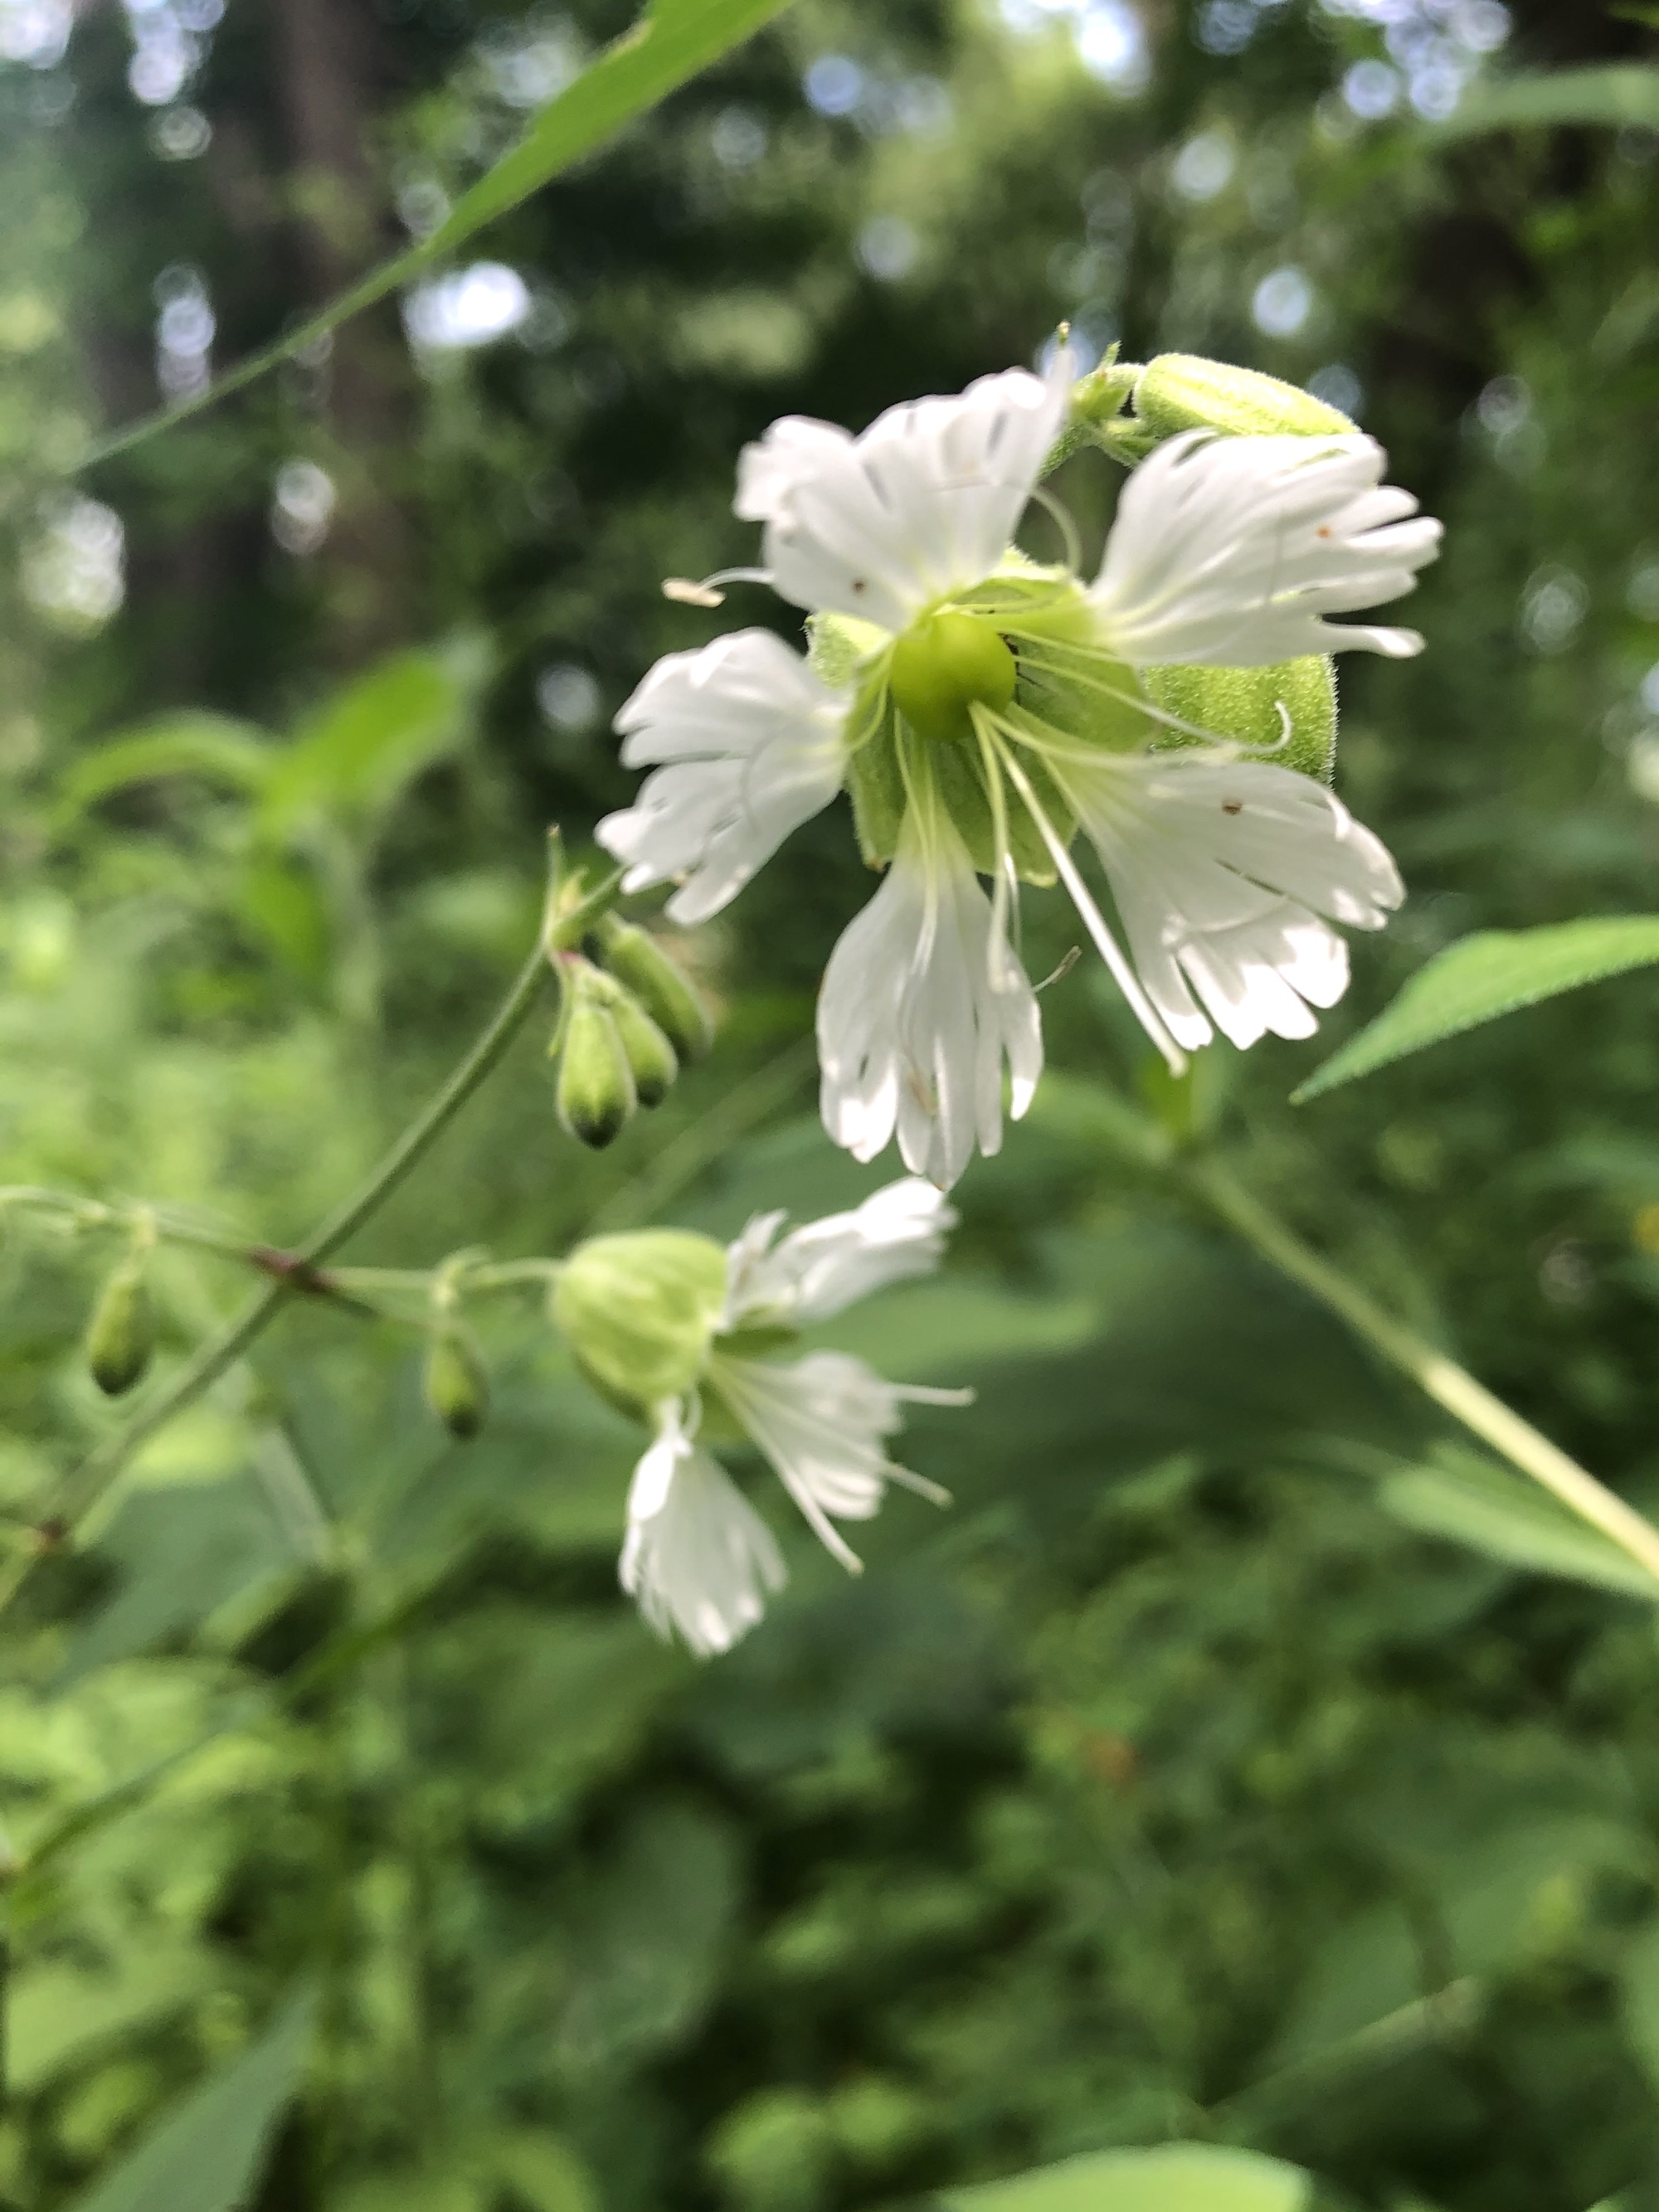 Starry Campion in Nakoma Park on July 14, 2020 in Madison, Wisconsin.